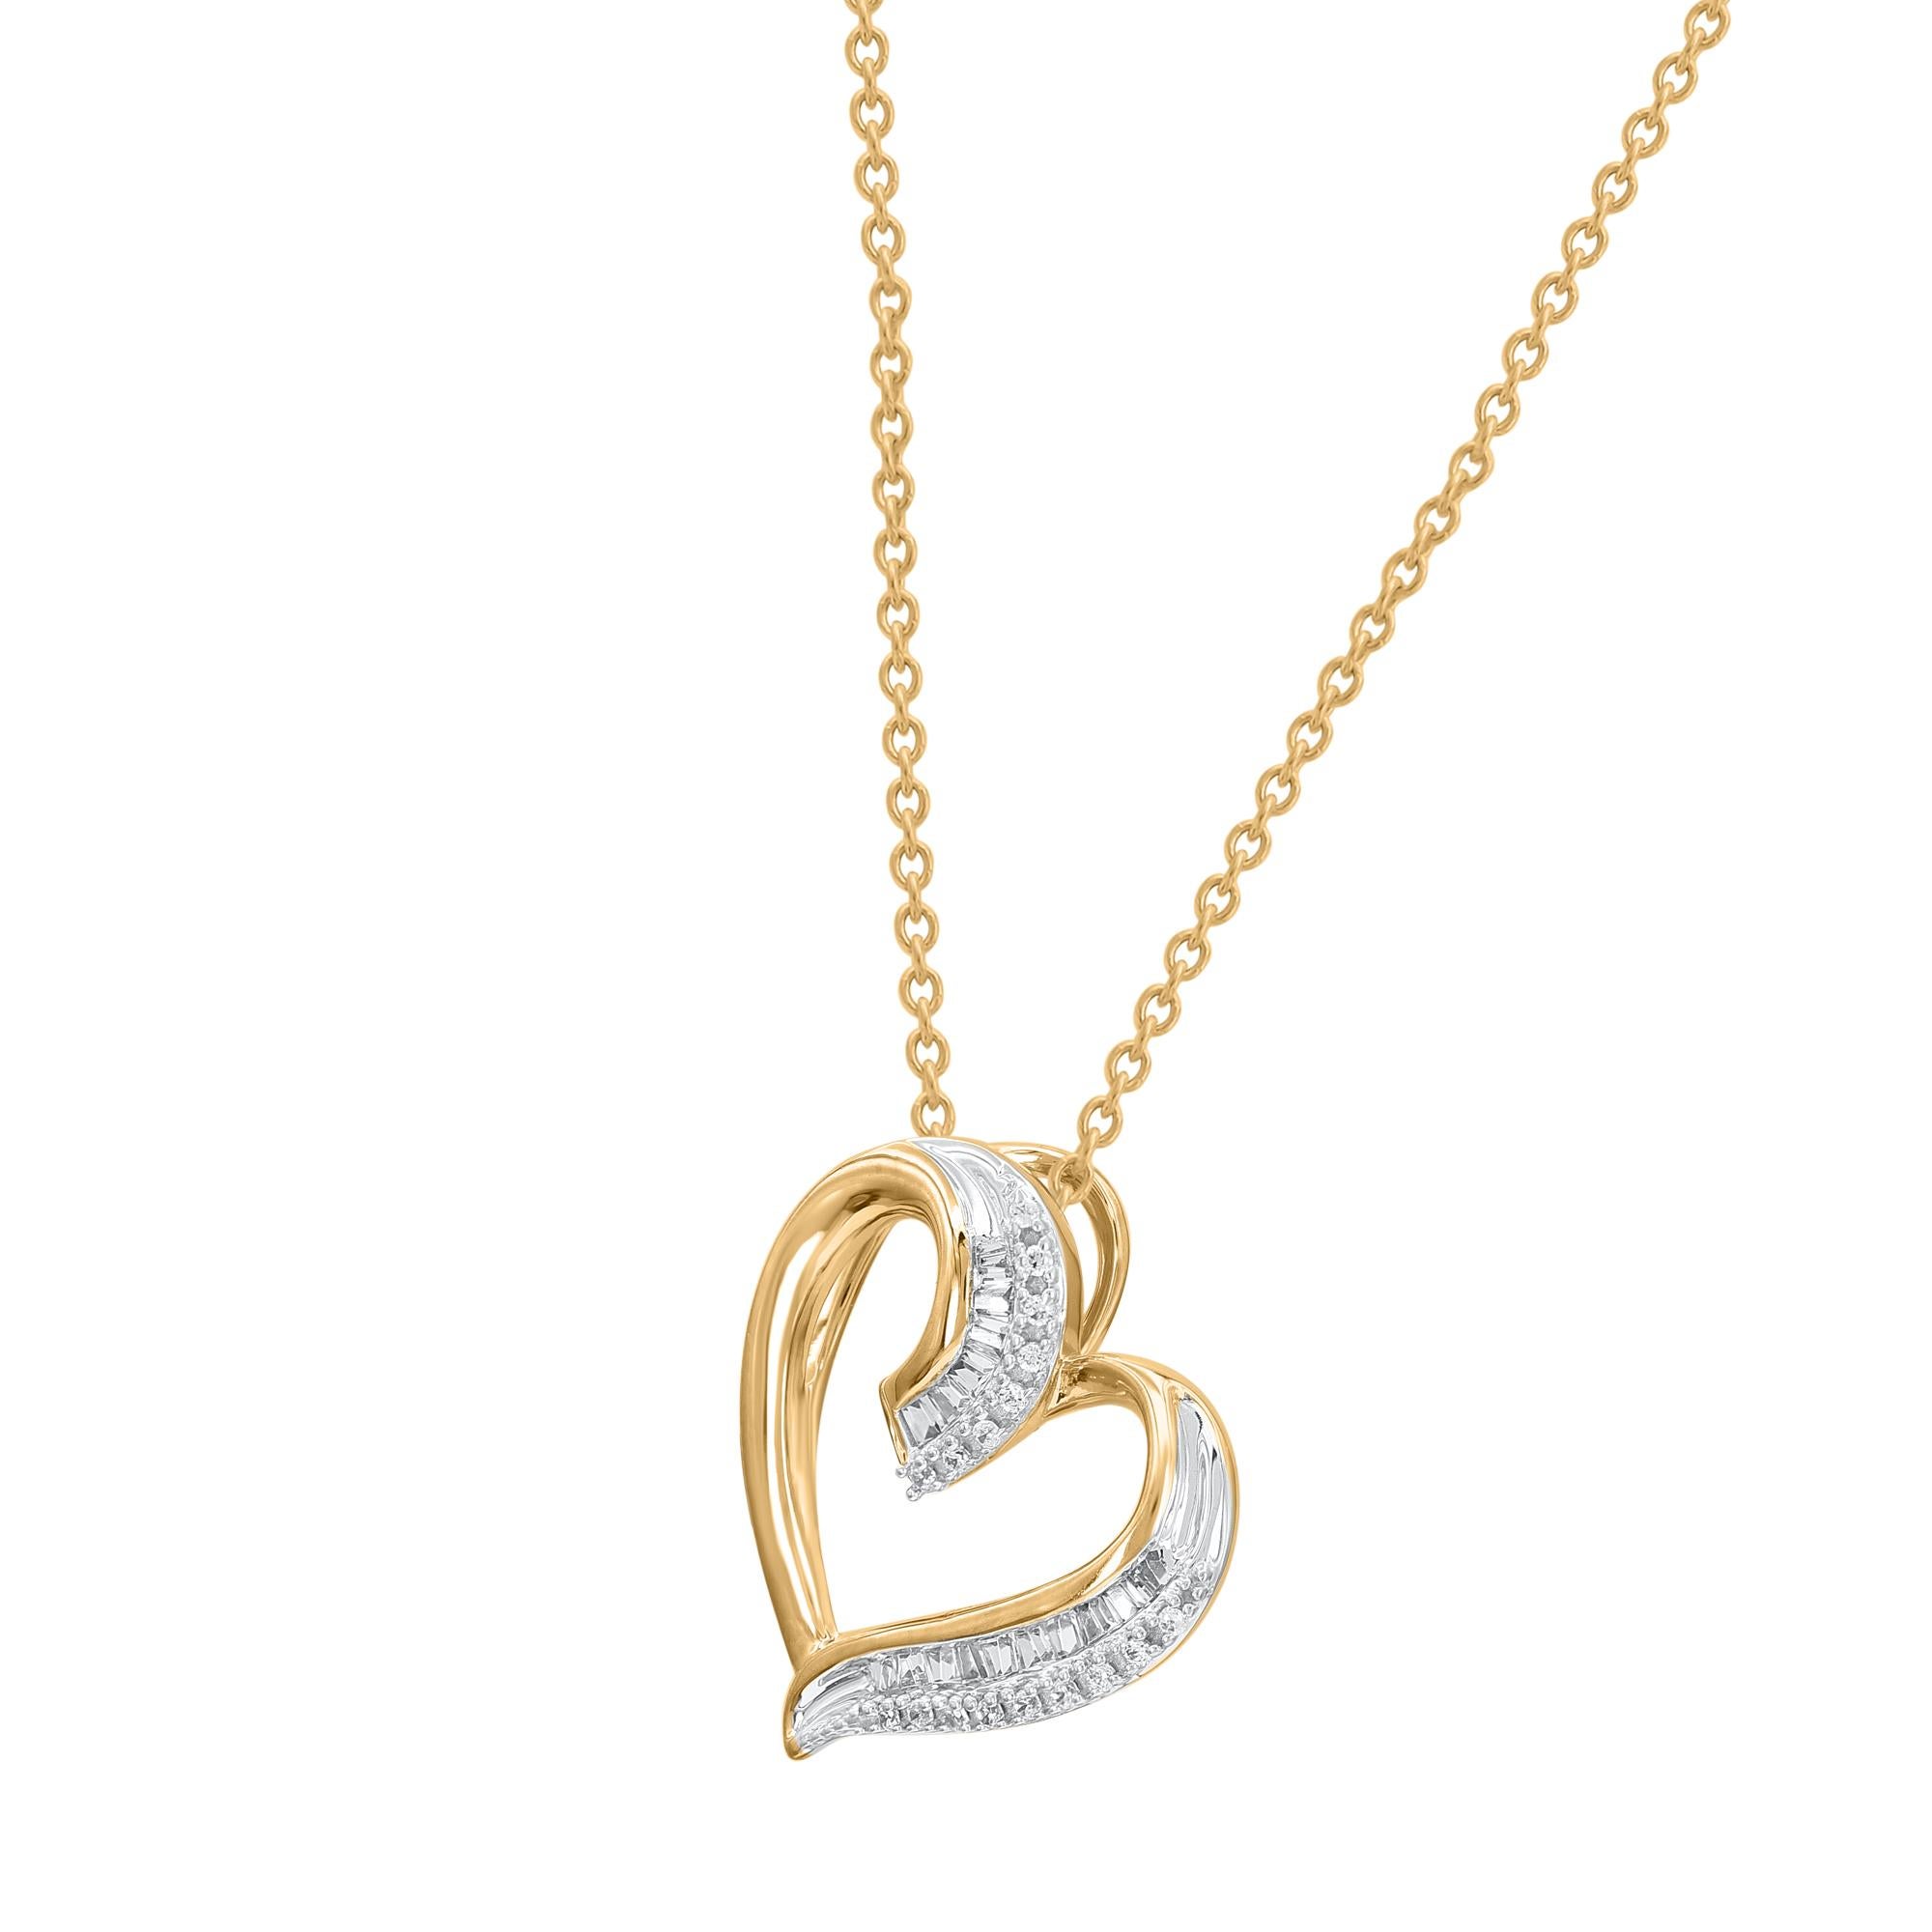 Bring charm to your look with this diamond tilted heart pendant. The pendant is crafted from 18 karat gold and features 42 round and baguette-cut white diamond set in  prong and channel set and a high polish finish complete the Brilliant